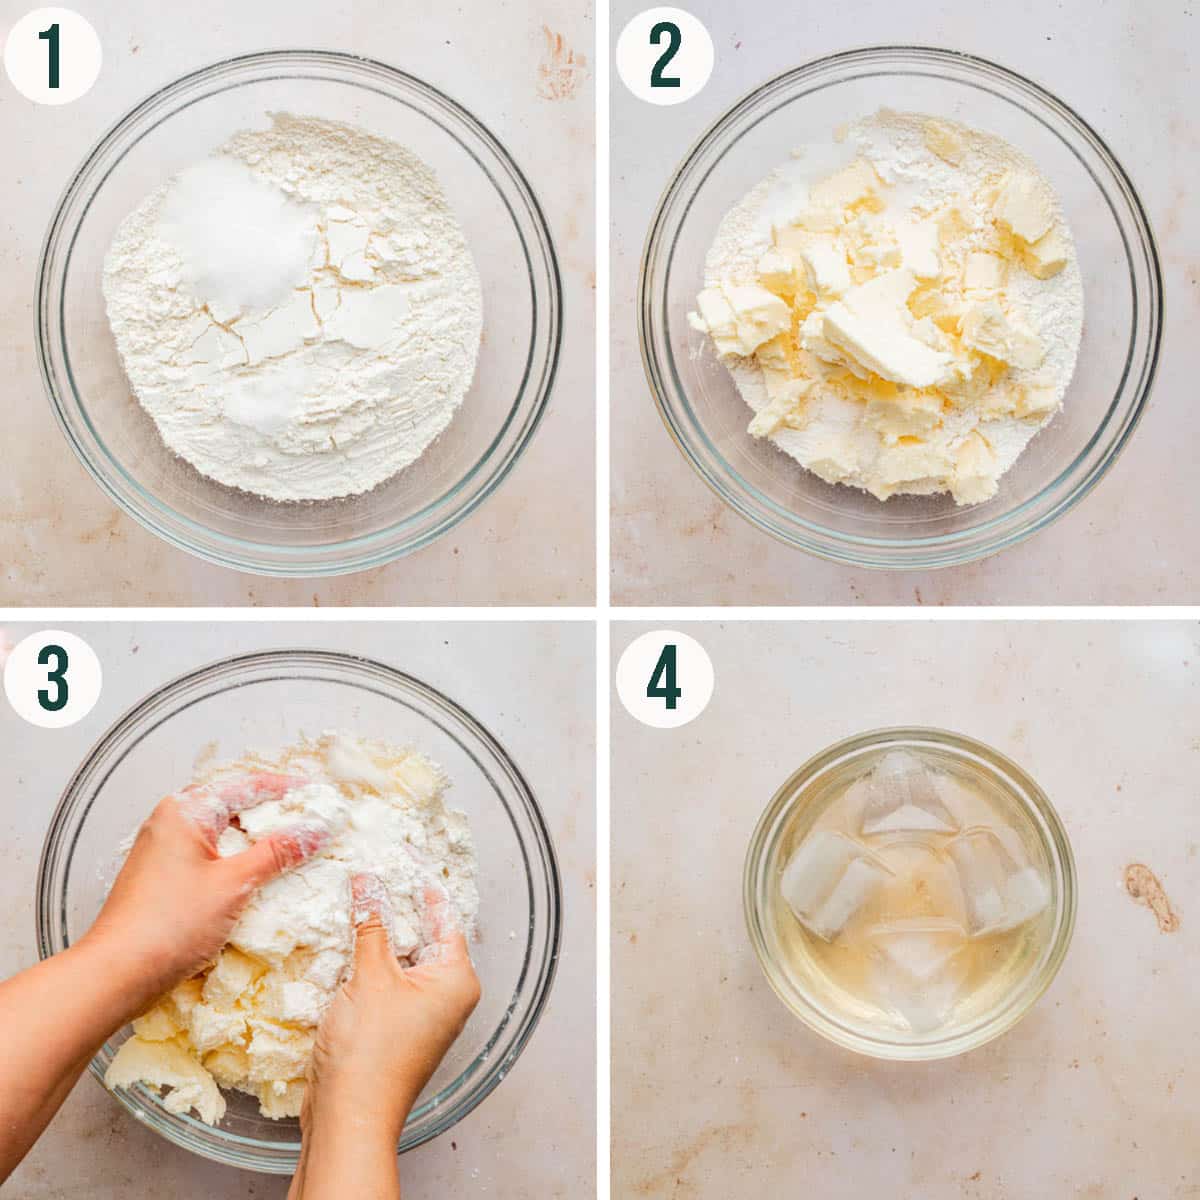 Pastry steps 1 to 4, mixing the dry ingredients, mixing in the butter, and making ice water.